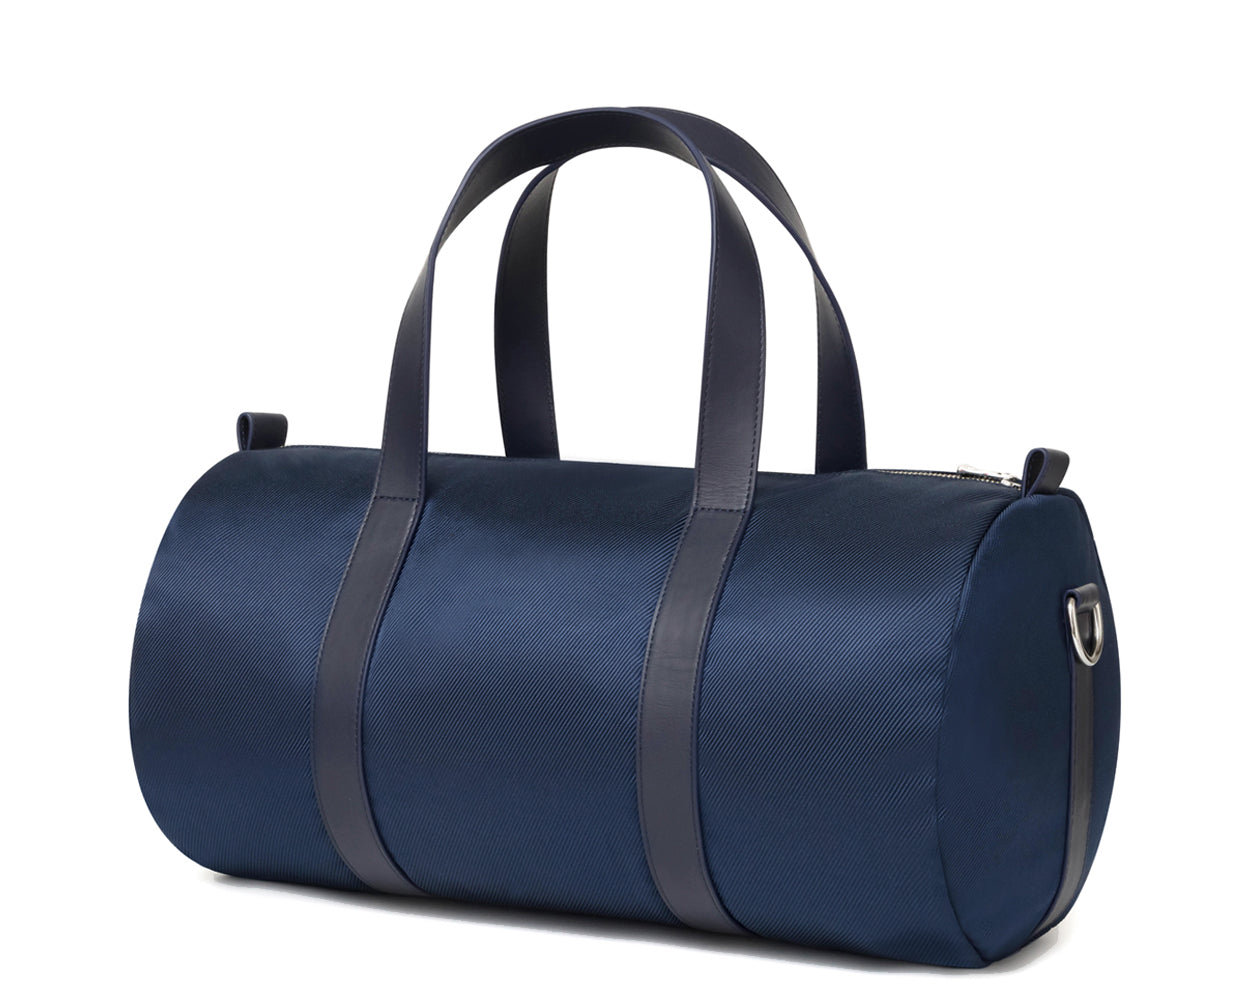 Navy custom banker bag with dark leather straps and detailing from Holderness and Bourne angled to the left.